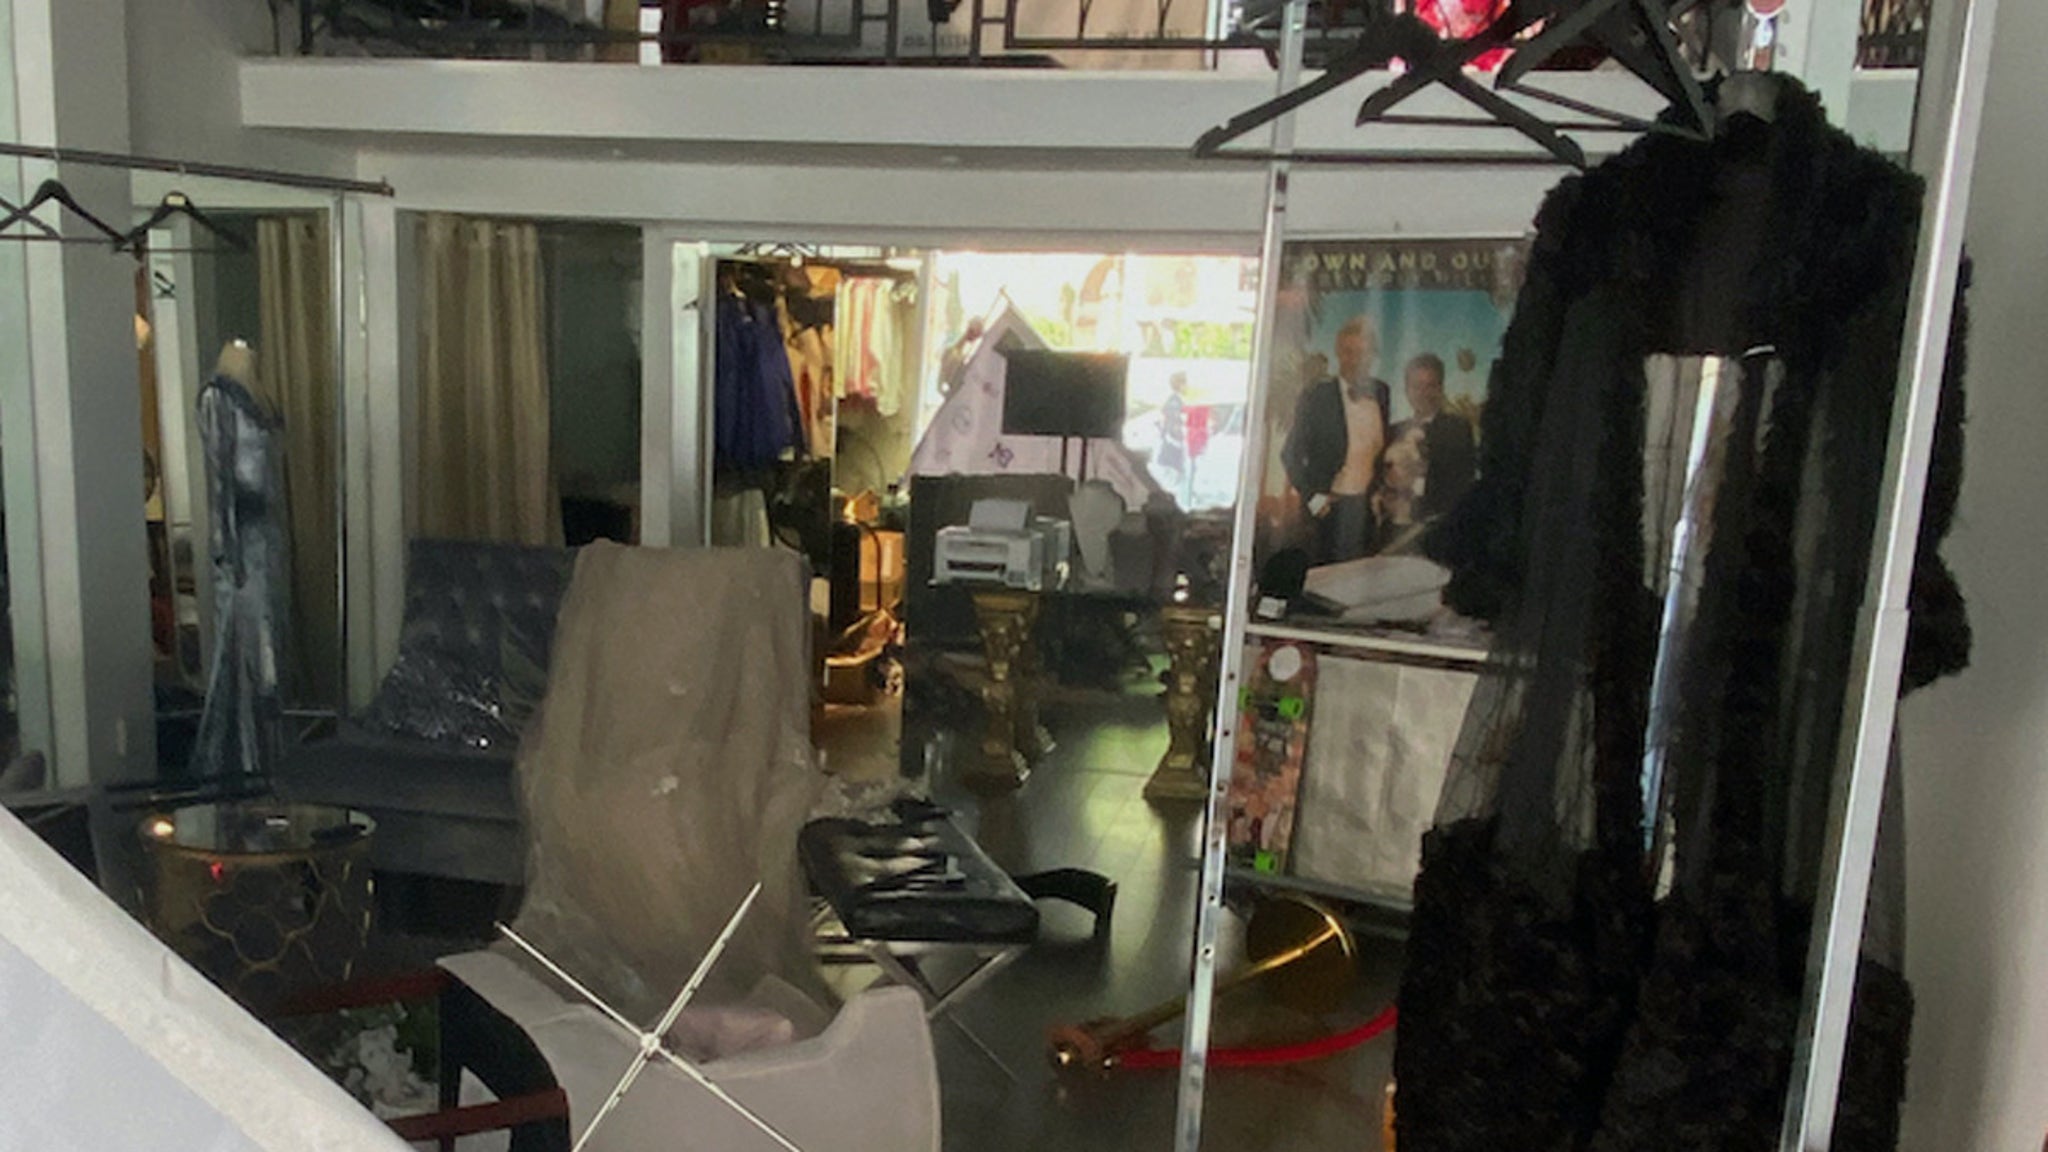 'Gown and Out' Dress Shop Destroyed in Riots, Over $500k in Damages - TMZ